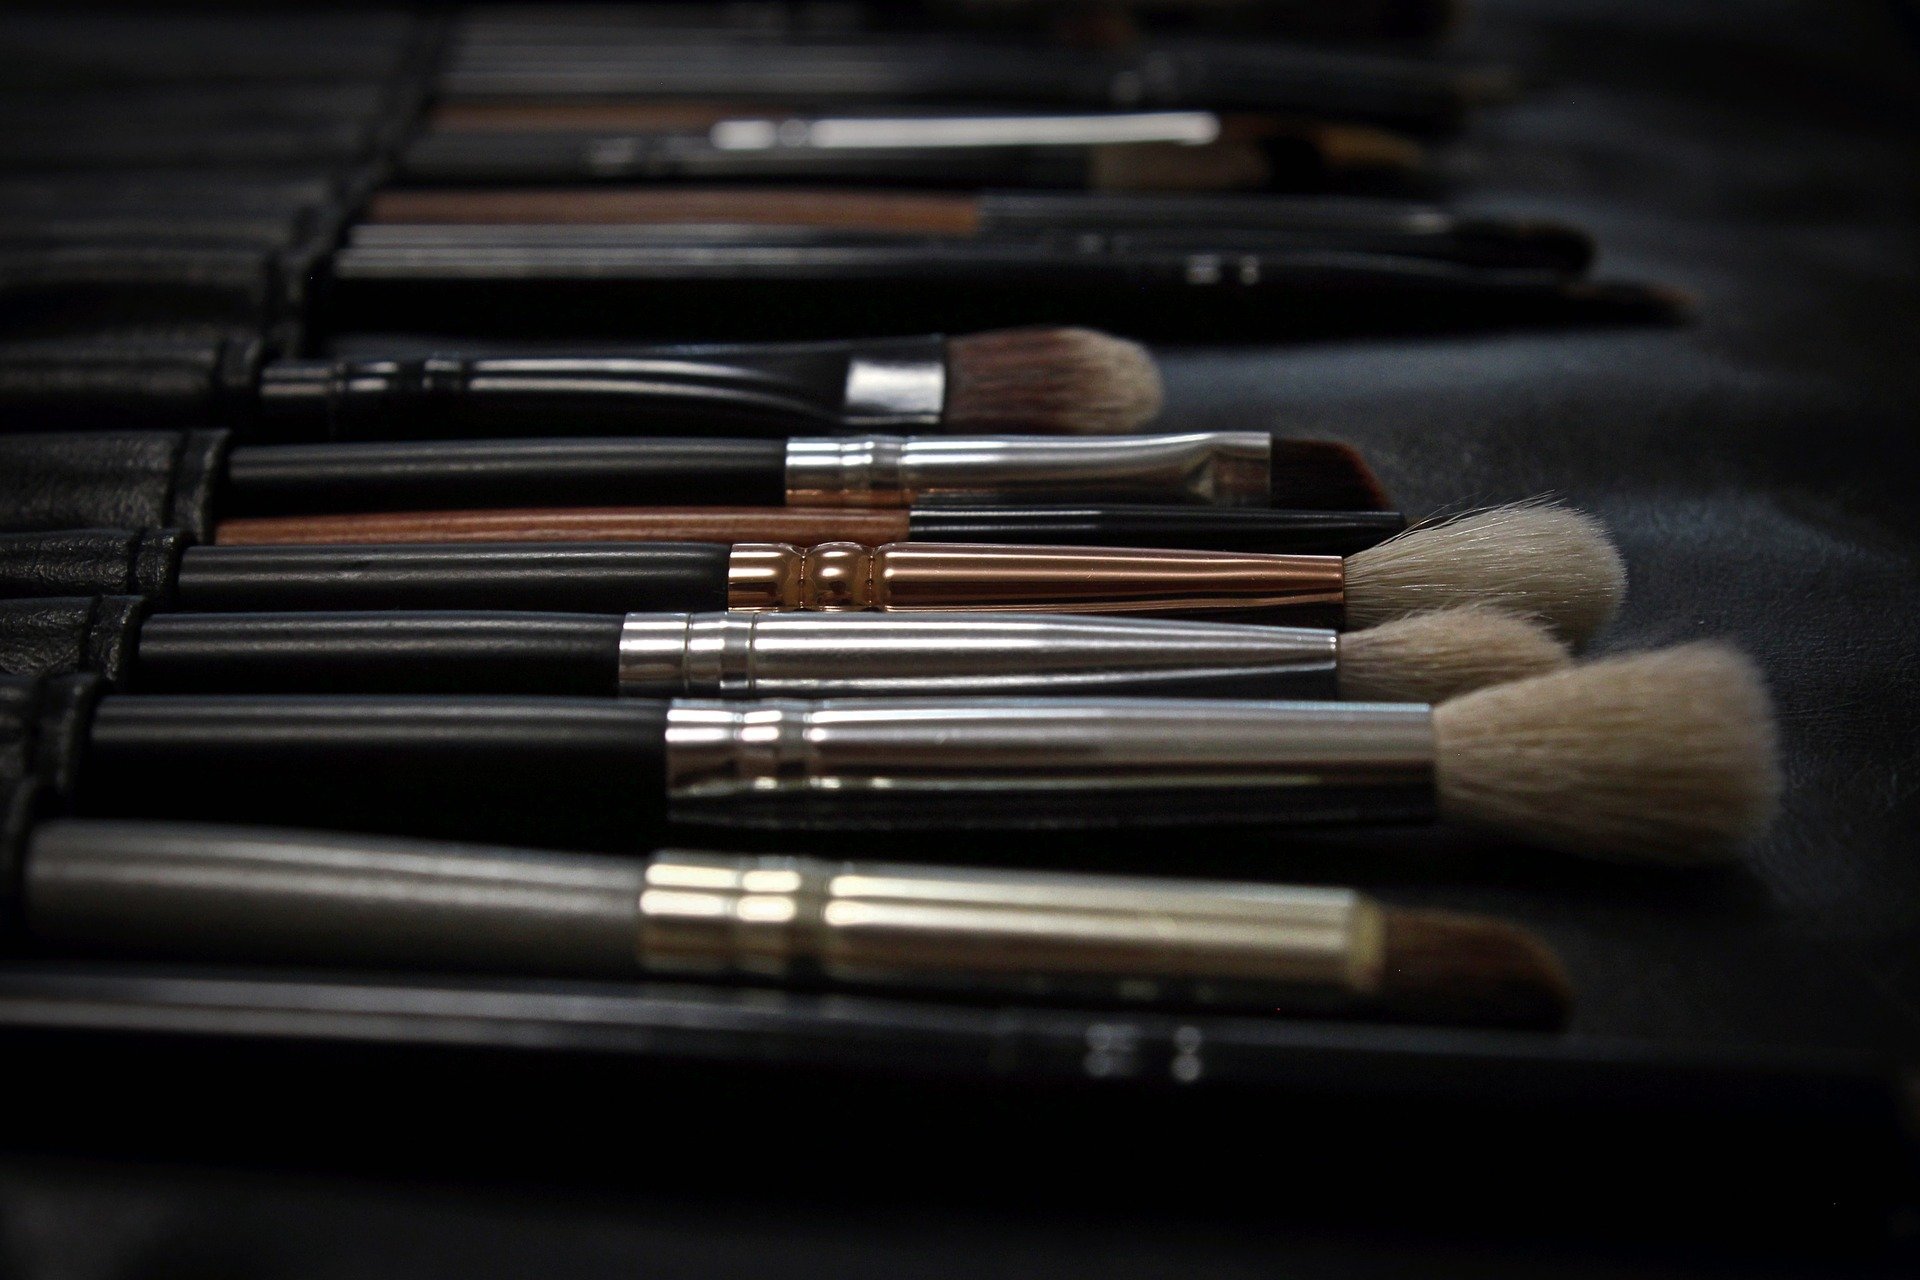 How Pro Makeup Artists Clean Their Makeup Brushes When Working